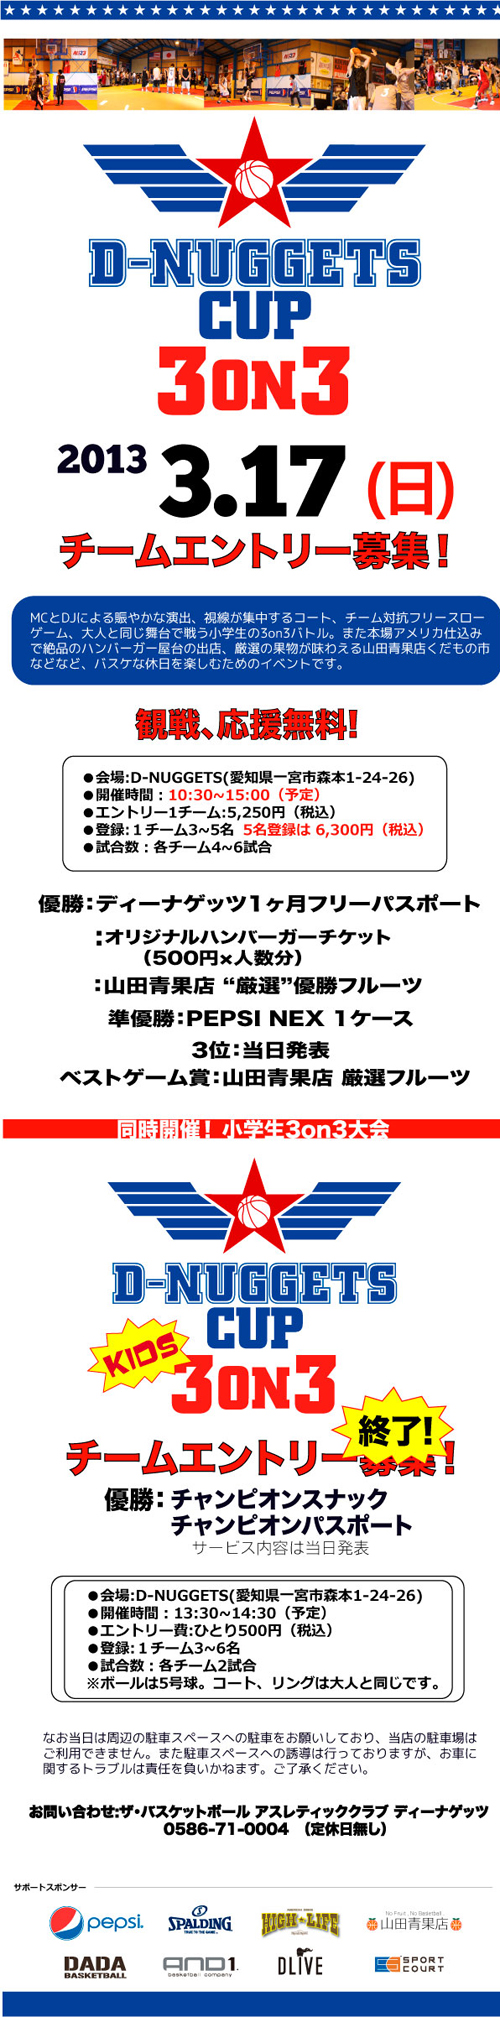 D-nuggetscup2013_3.jpg